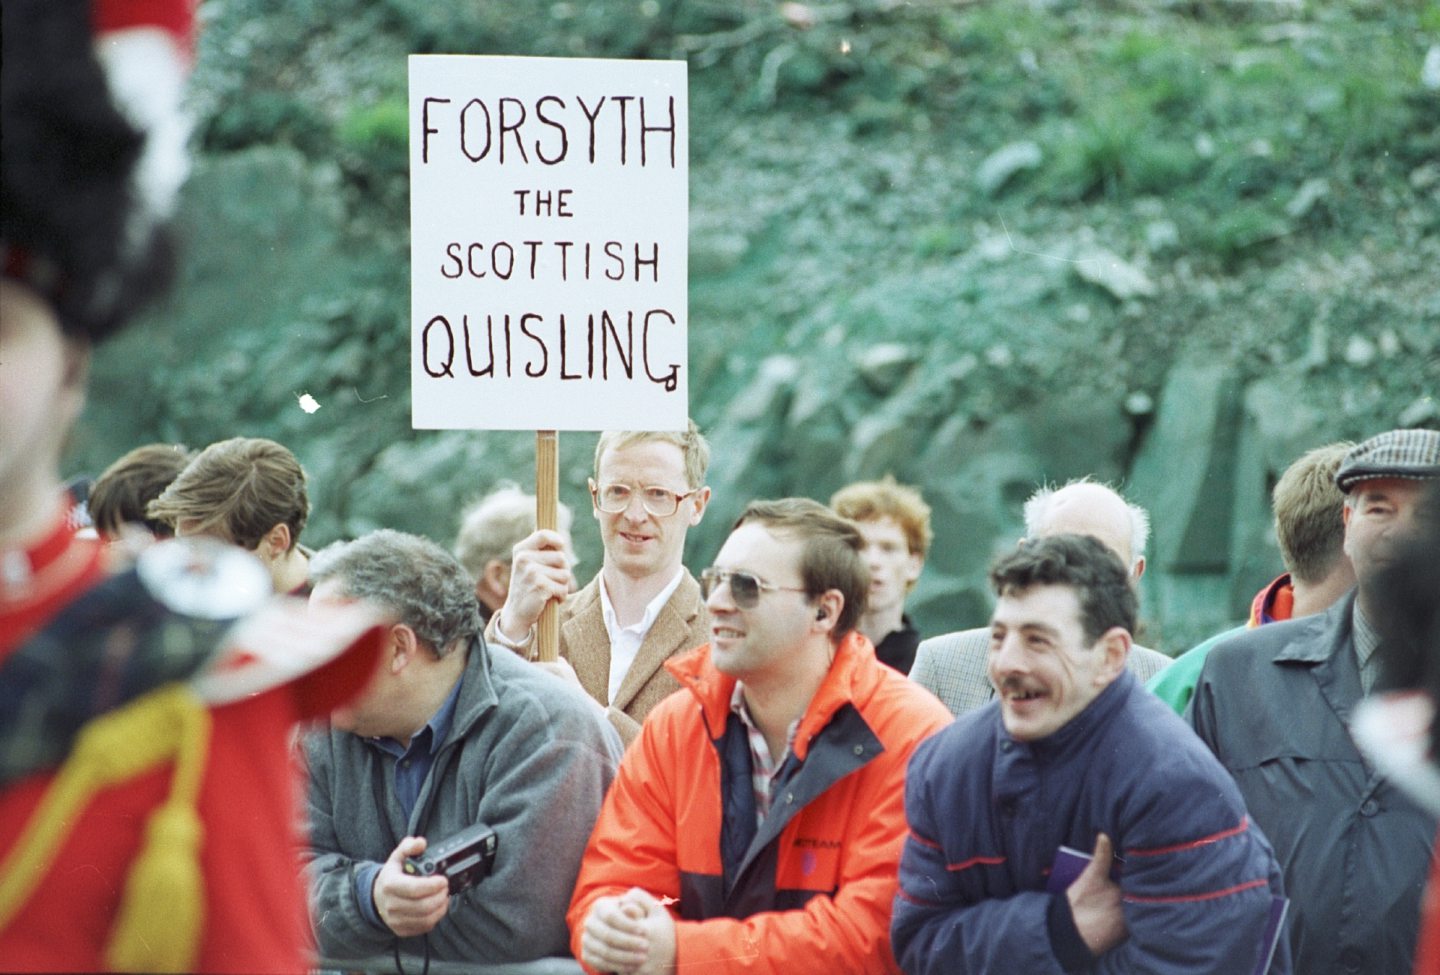 Michael Forsyth made a symbolic crossing of the bridge after its opening in 1995. His presence did not meet with overall approval as demonstrated by Ian McKemmie.